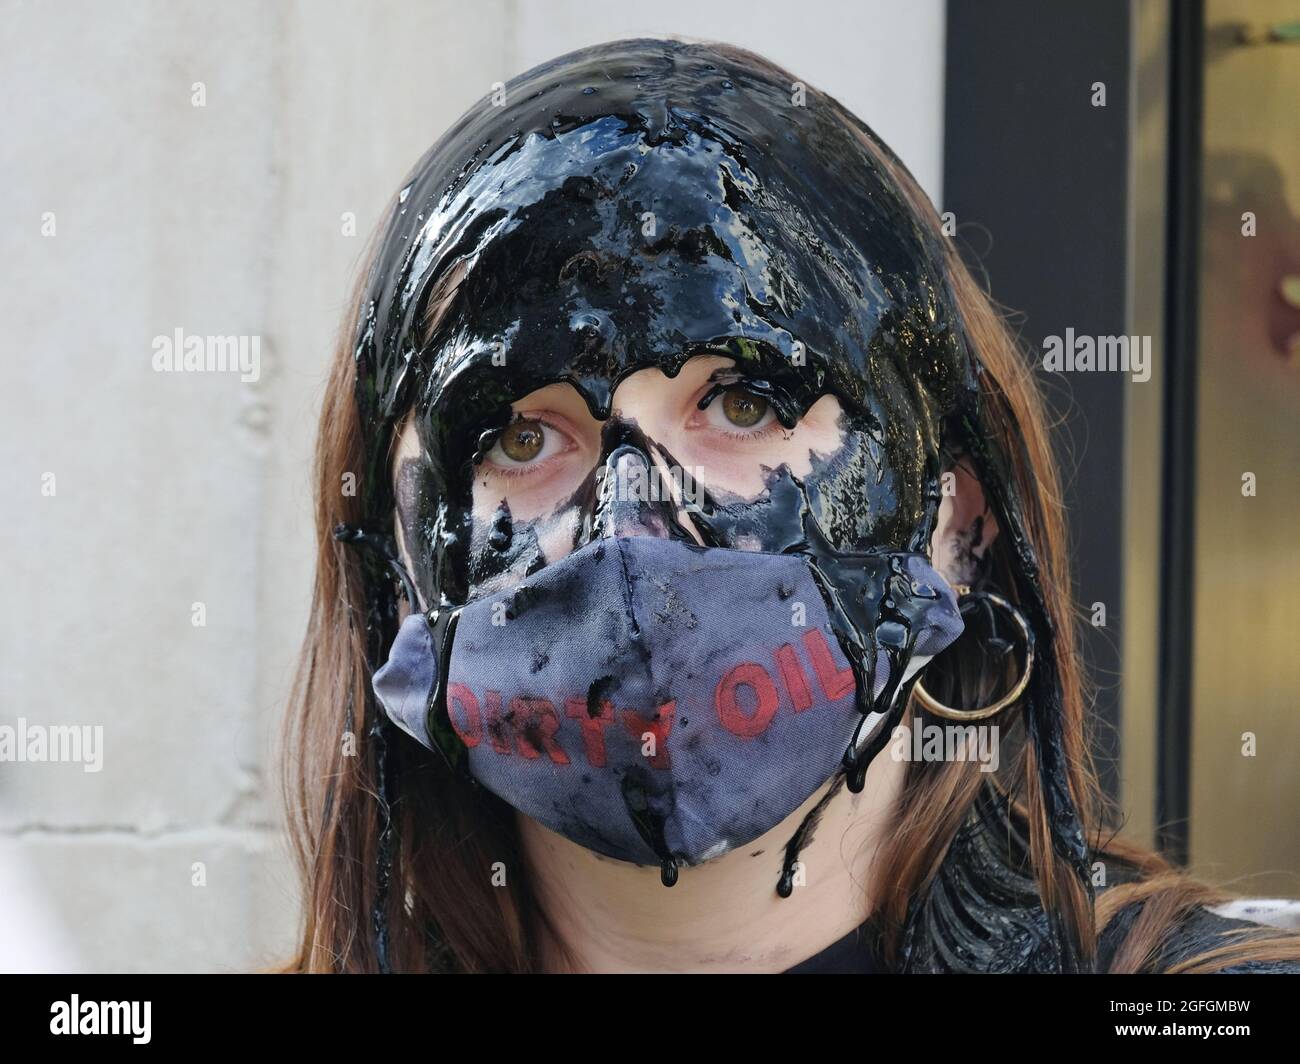 London, UK. A woman pours fake oil over her head in a protest to highlight the environmental concerns linked to the fast fashion industry. Stock Photo